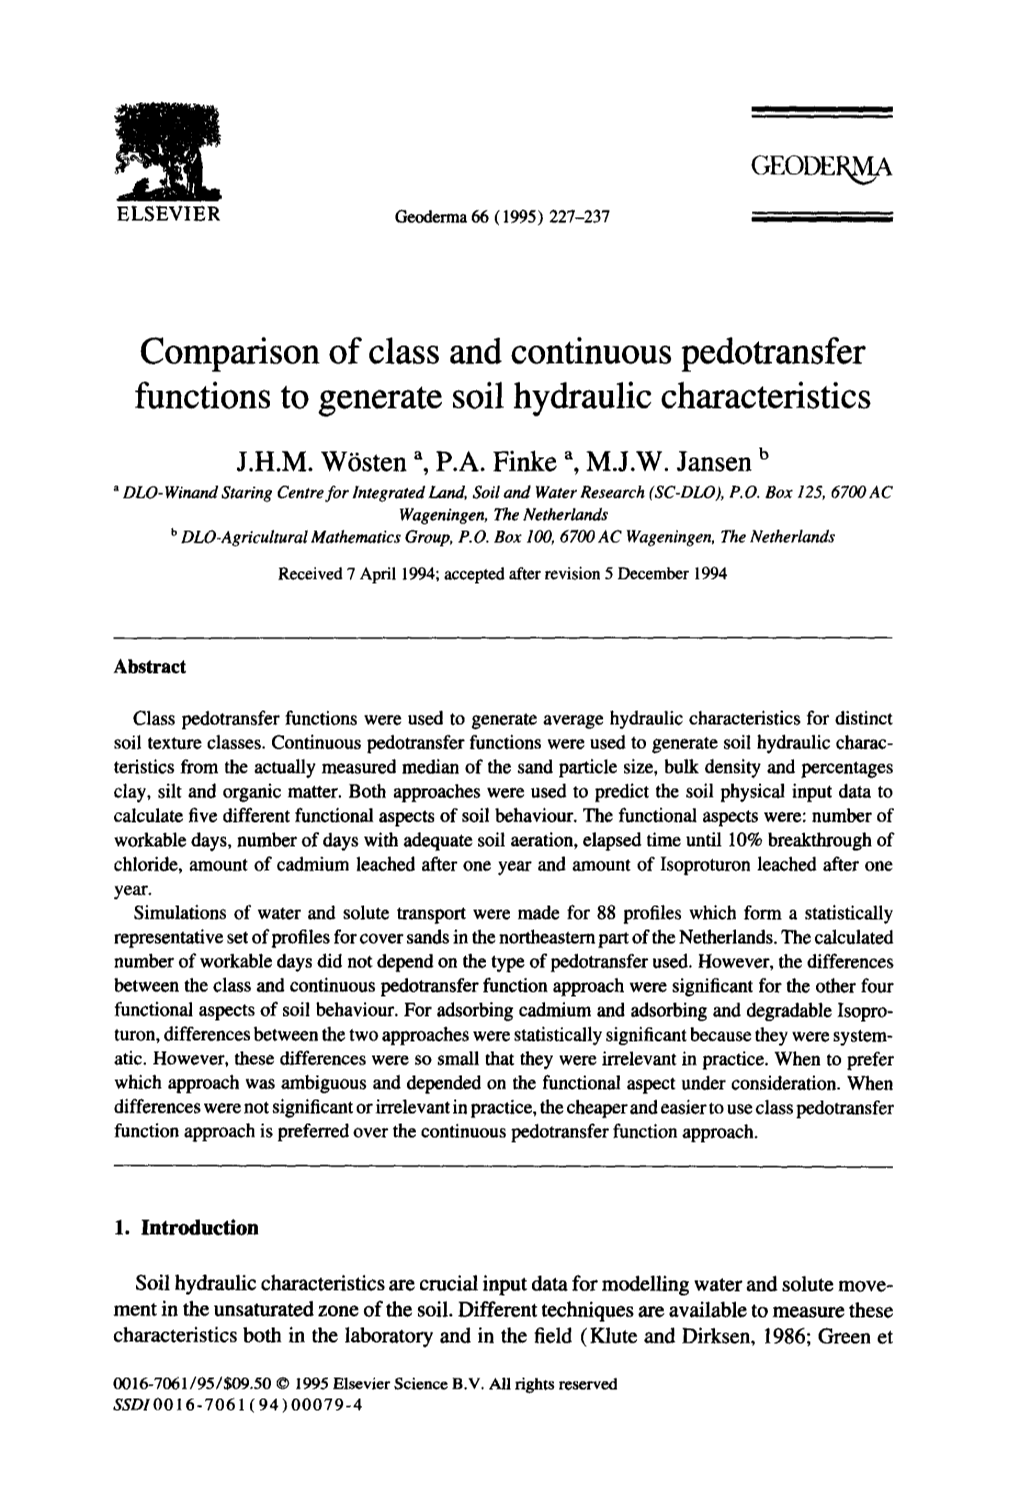 Comparison of Class and Continuous Pedotransfer Functions to Generate Soil Hydraulic Characteristics